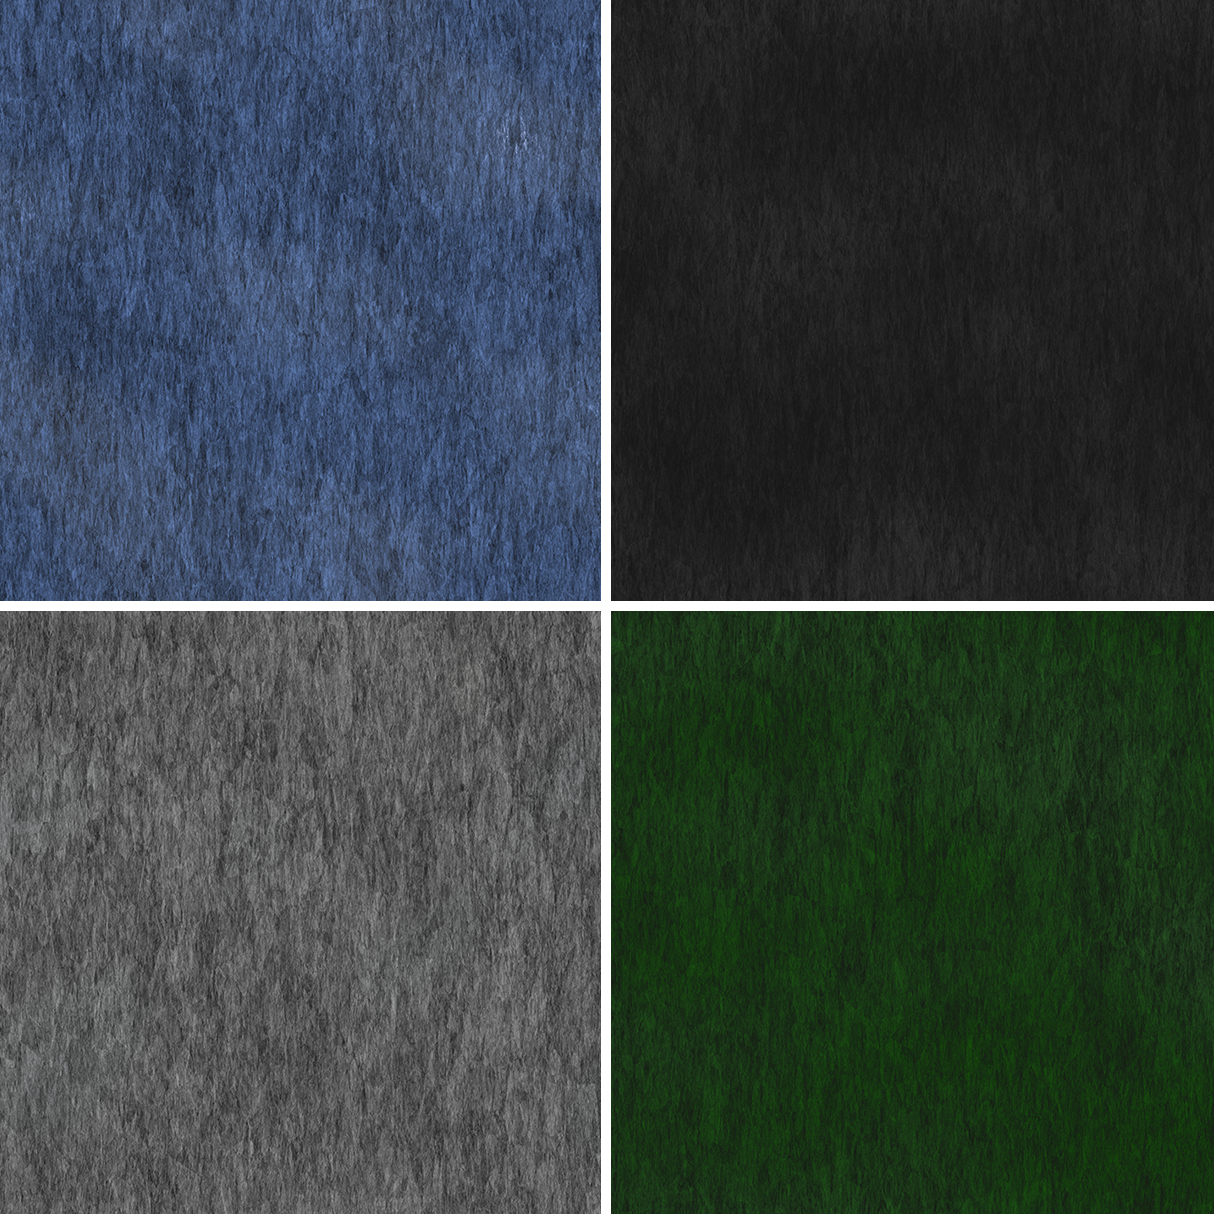 30 Suede Background Textures Samples – Part 1